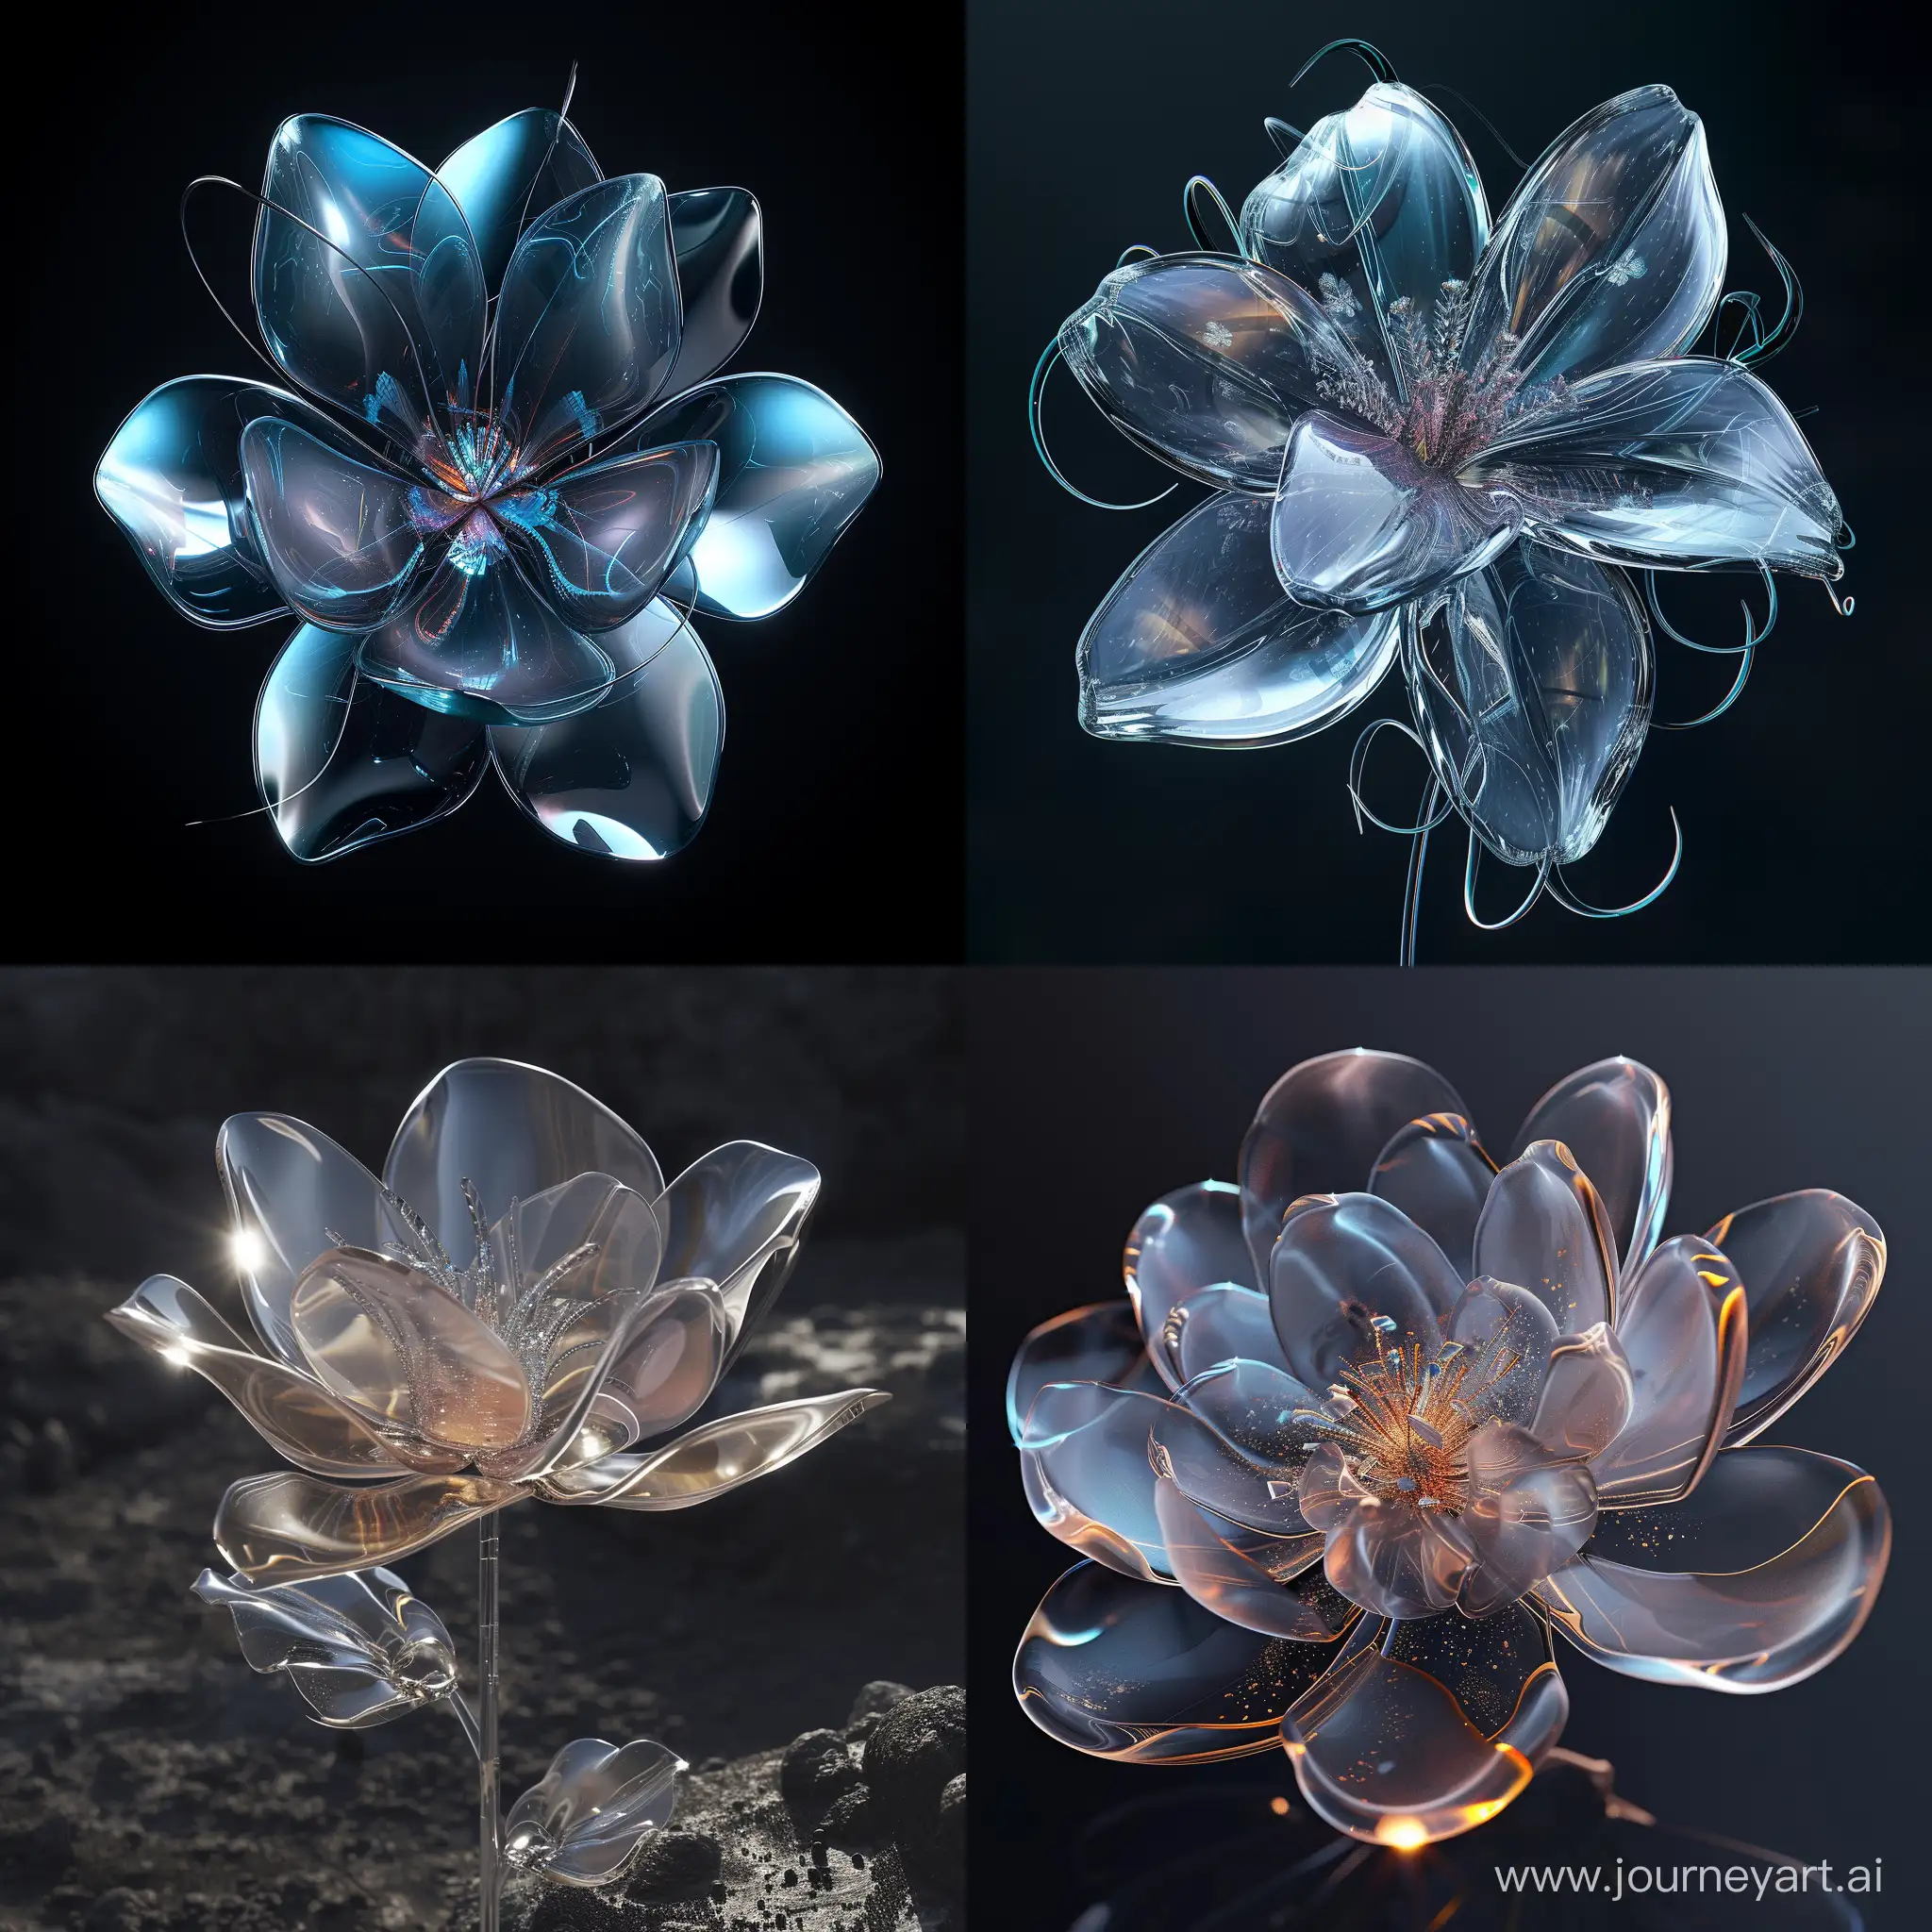 Futuristic flower made with glass, highly detailed, cinematic